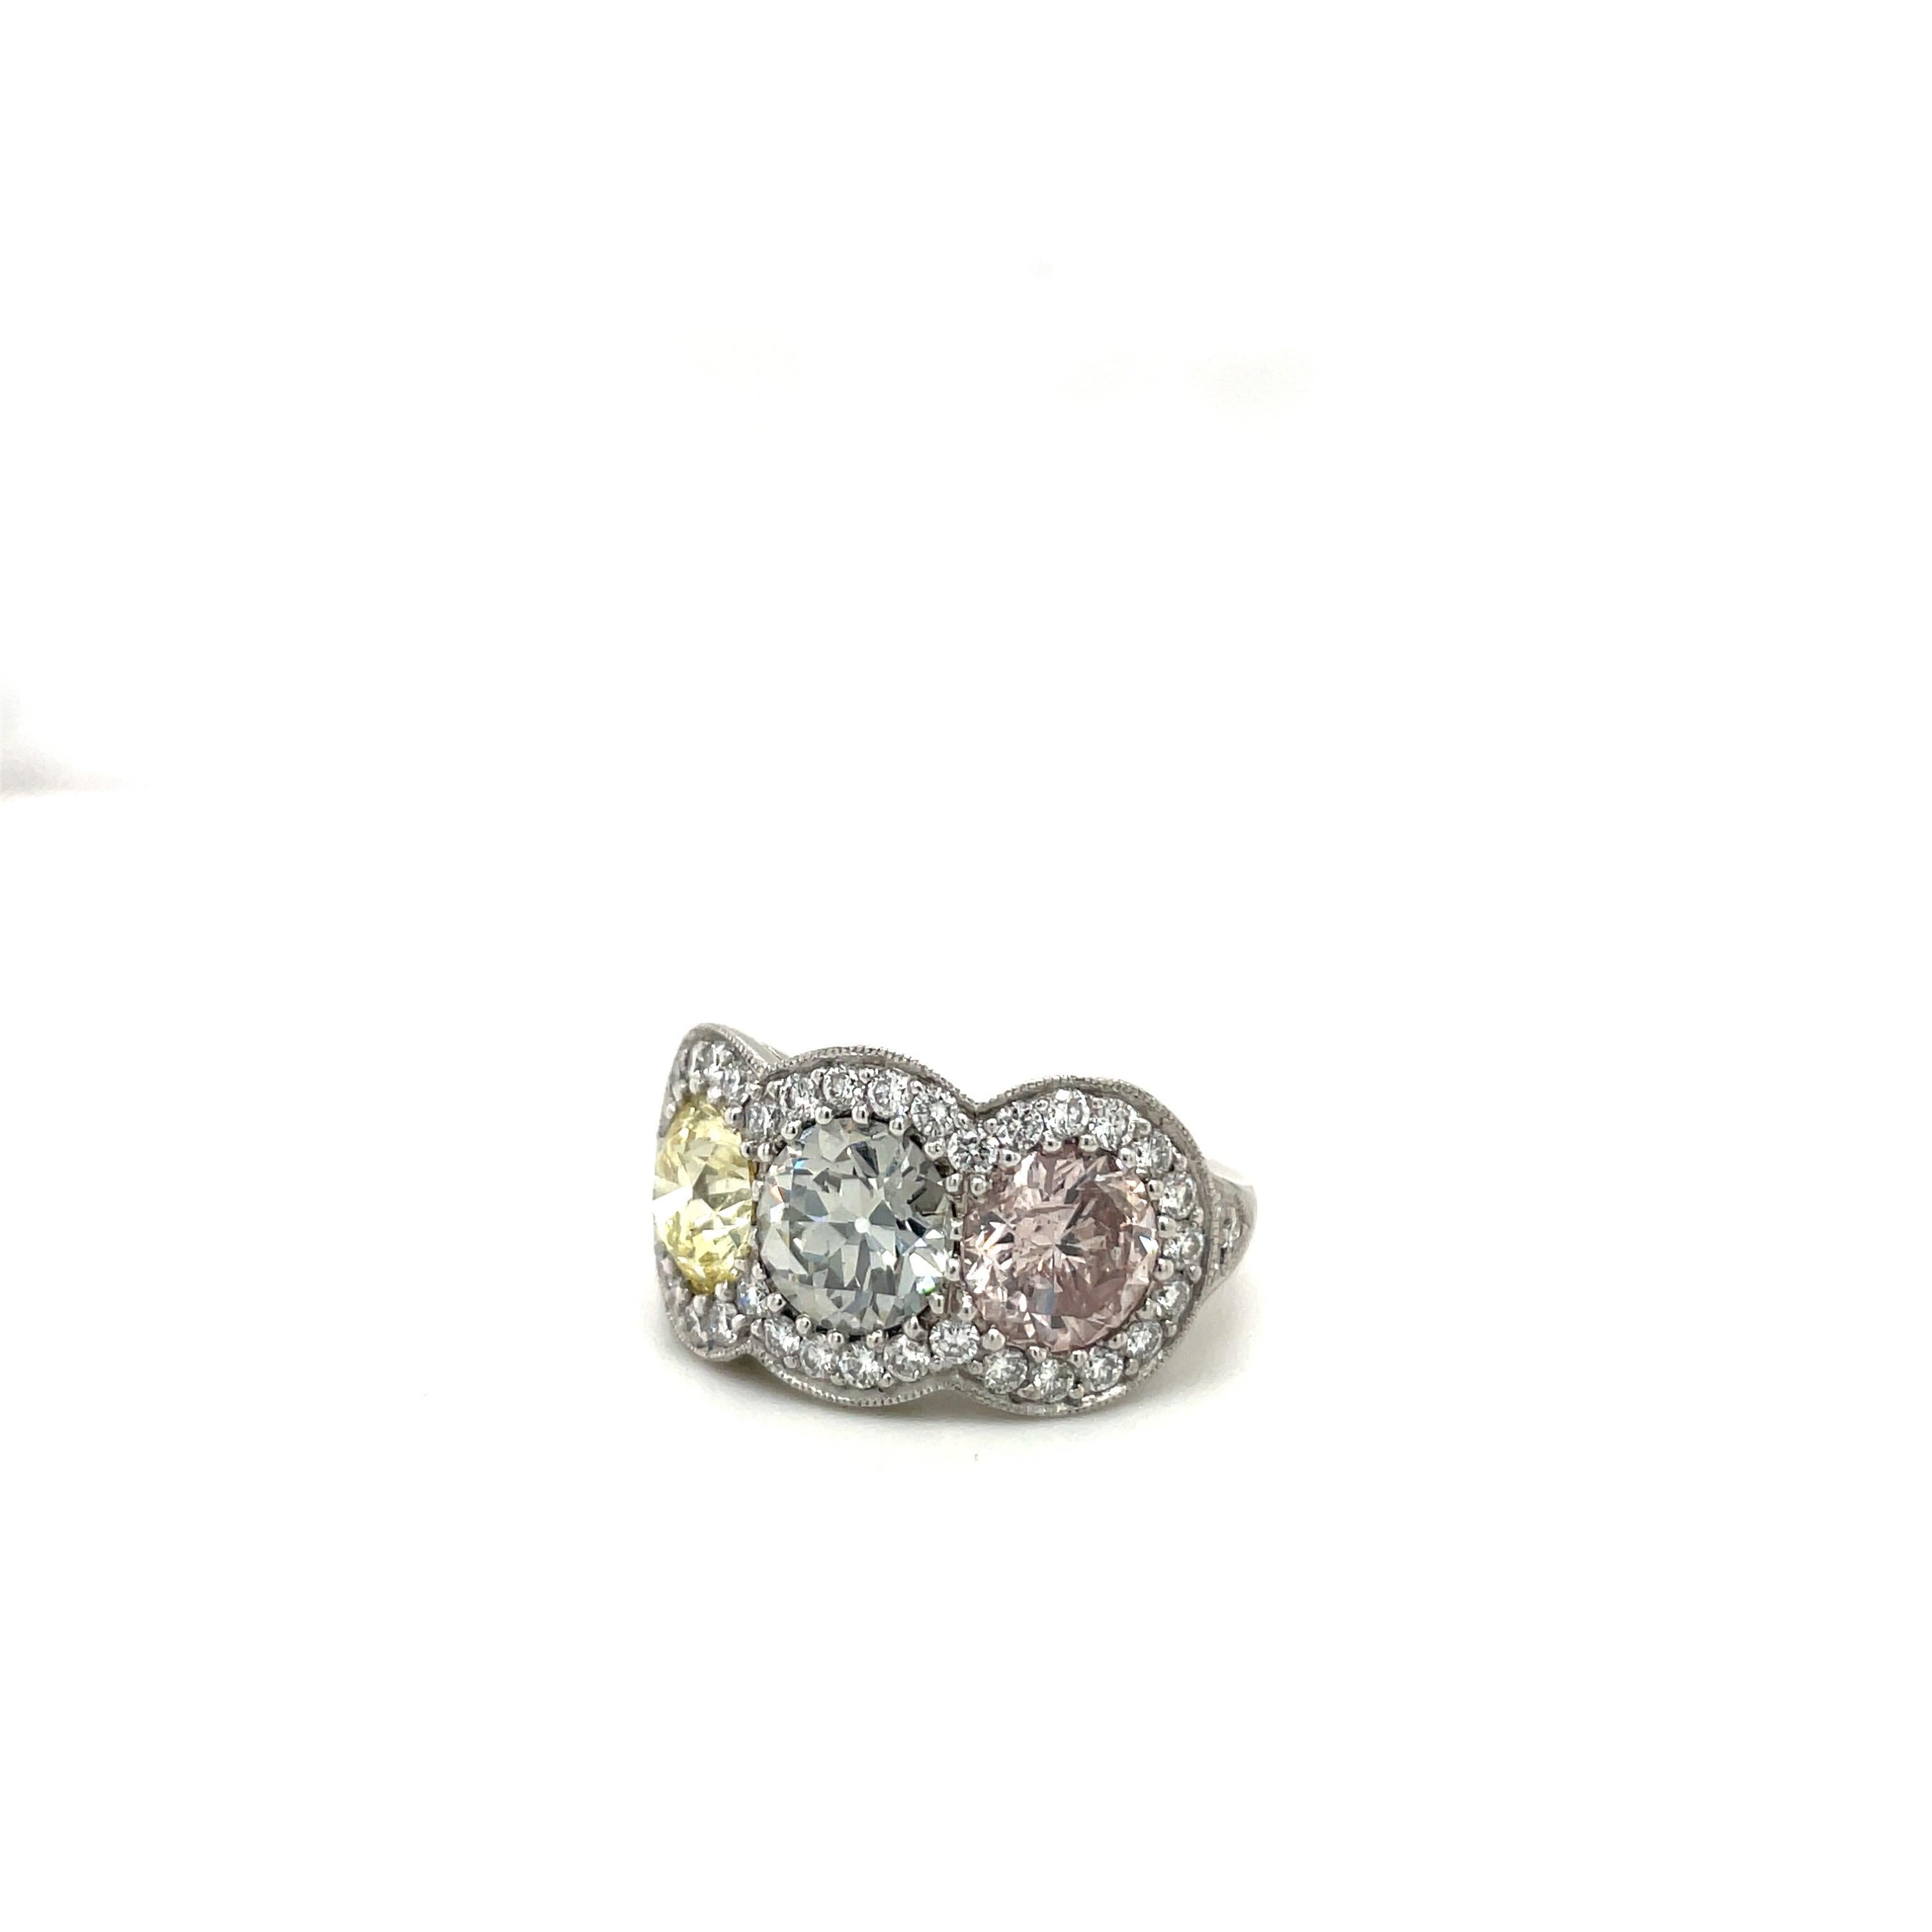 Cellini Plat Fancy Colored 1.43Ct Pink 1.34Ct Yellow 1.53Ct Grey Diamond Ring For Sale 1